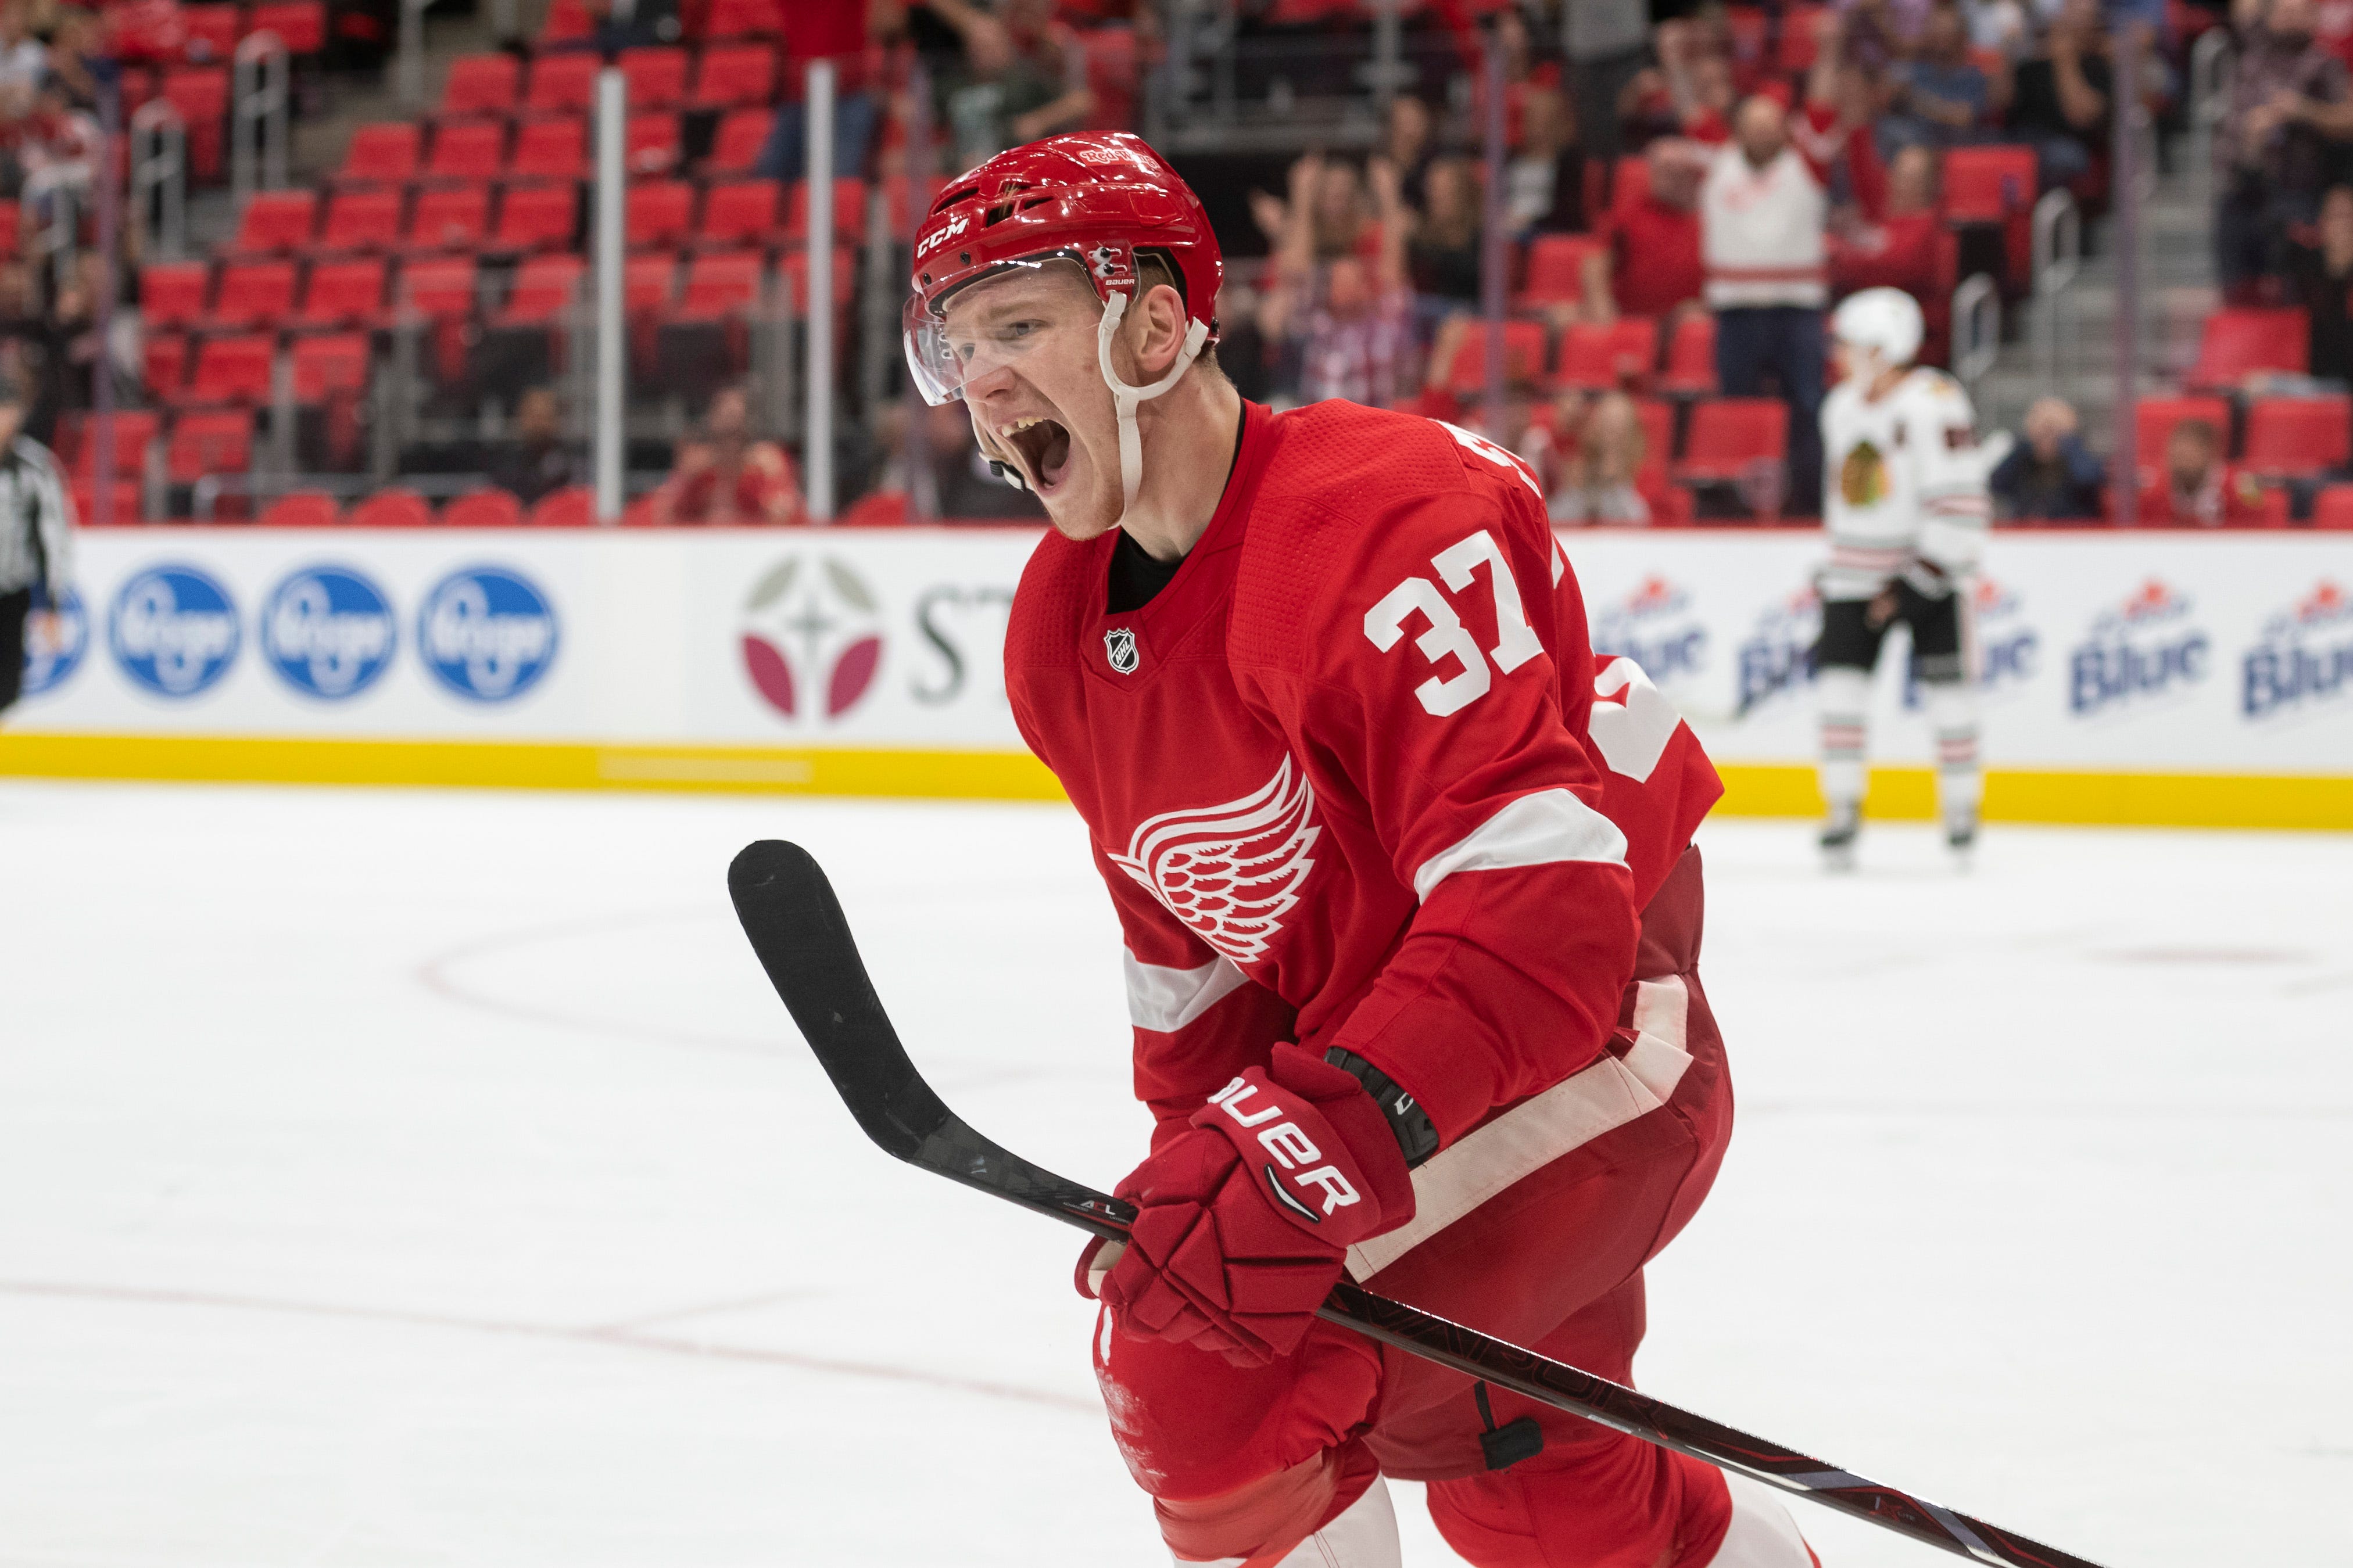 13. Evgeny Svechnikov, right wing. Svechnikov, 22, lost the entire season because of knee surgery after being injuried the final preseason game in September. It was disappointing on many levels, but especially because Svechnikov appeared to be winning a job on the opening night roster. The 2015 first-round pick remains a viable prospect because of his potential.